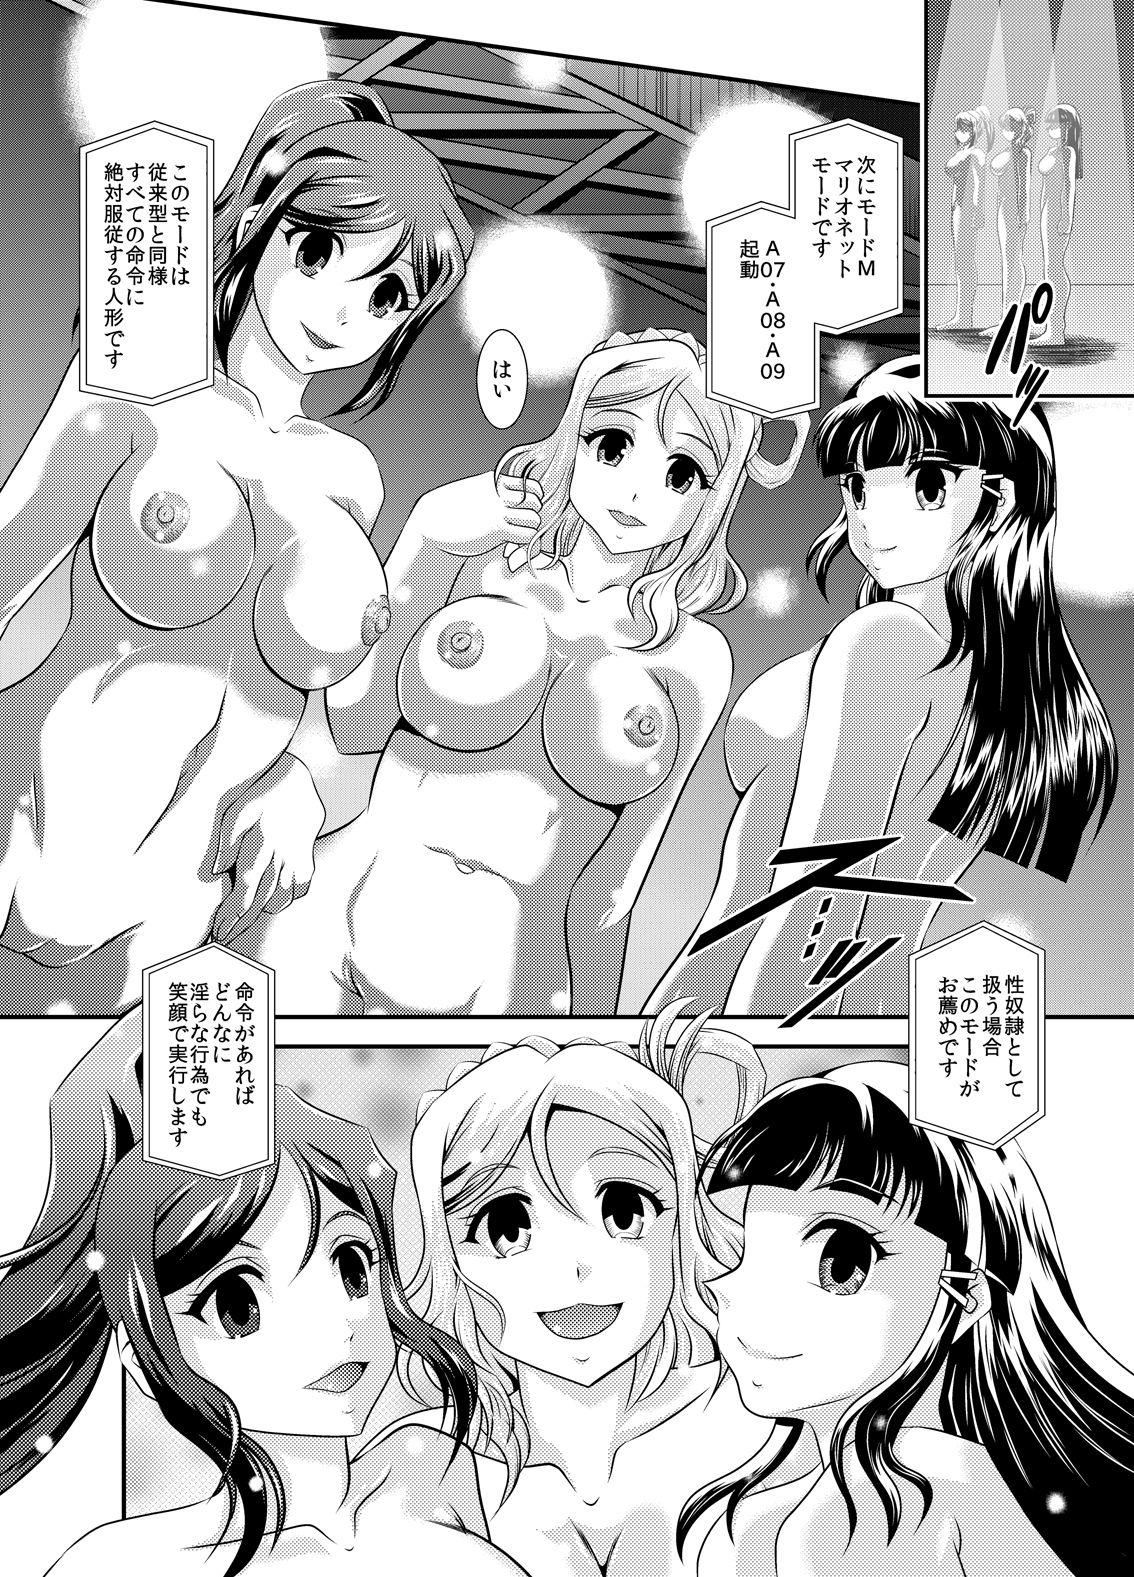 Glamour ProjectAqours EP04:HOPELESS - Love live sunshine Whore - Page 8